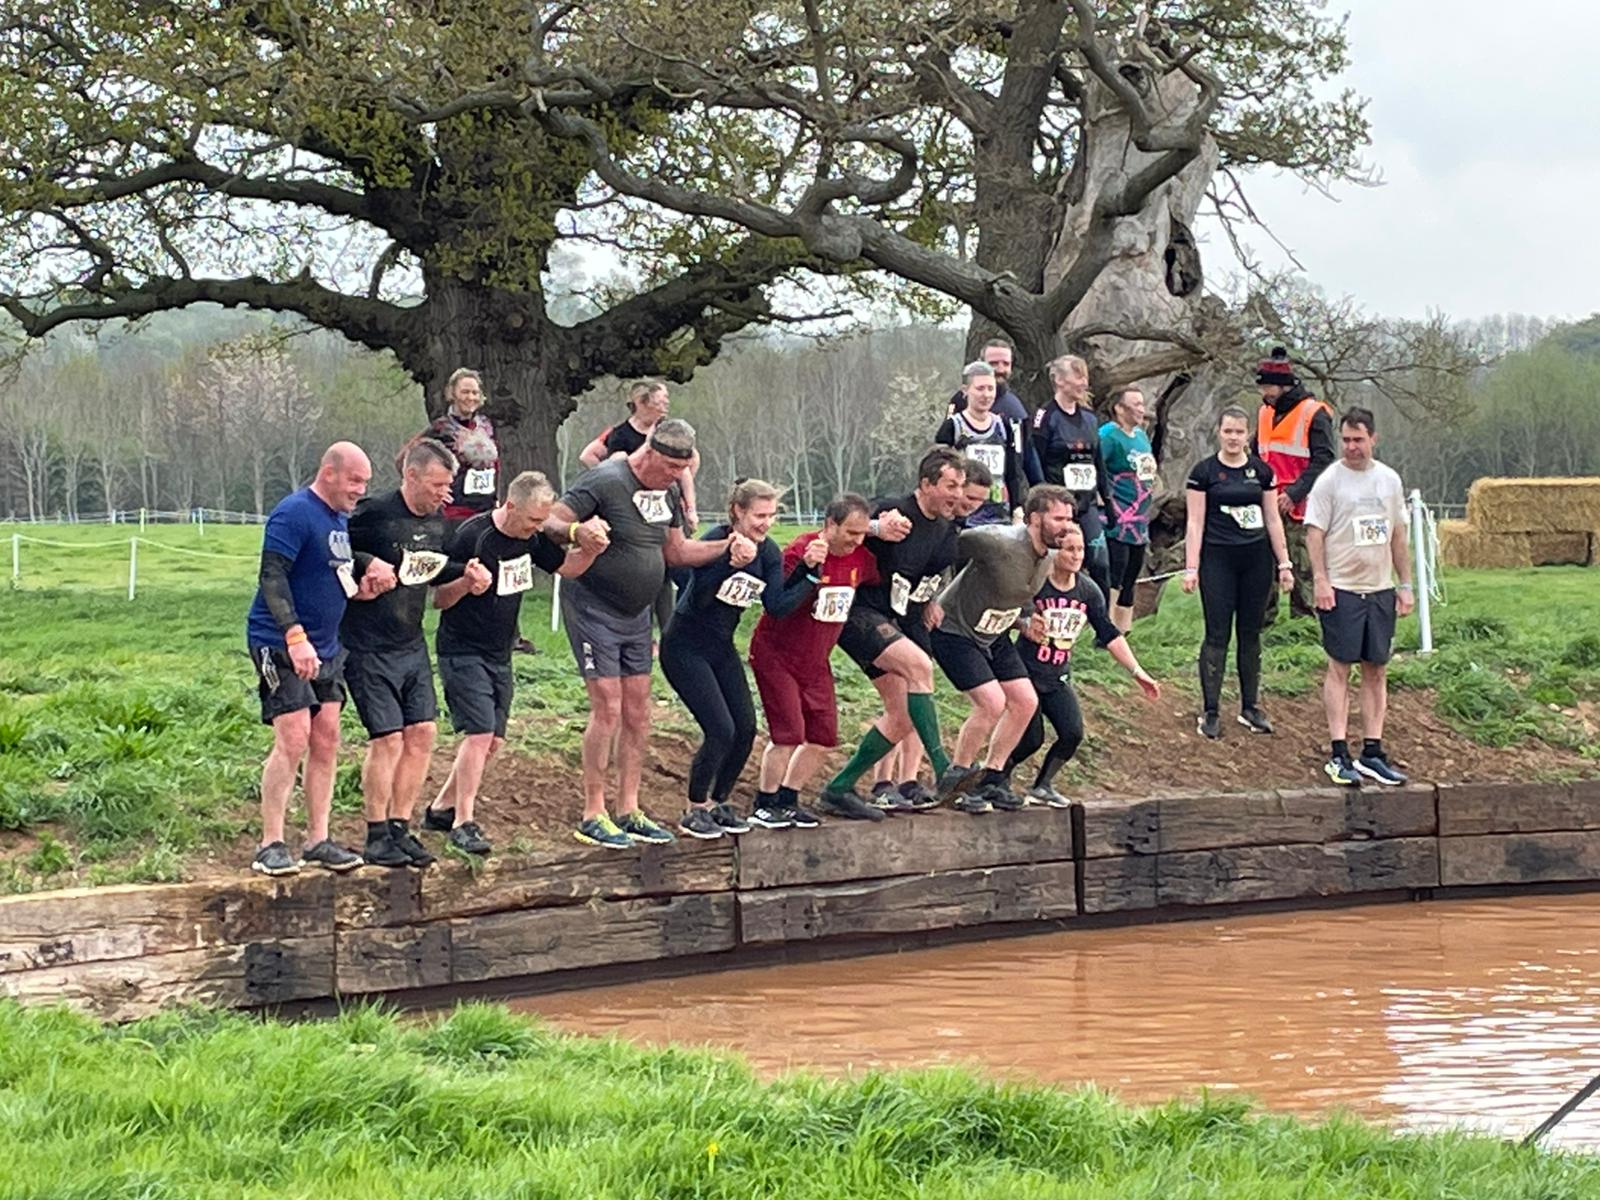 Well done to our team who took part in the Spring Wolf Run on Saturday